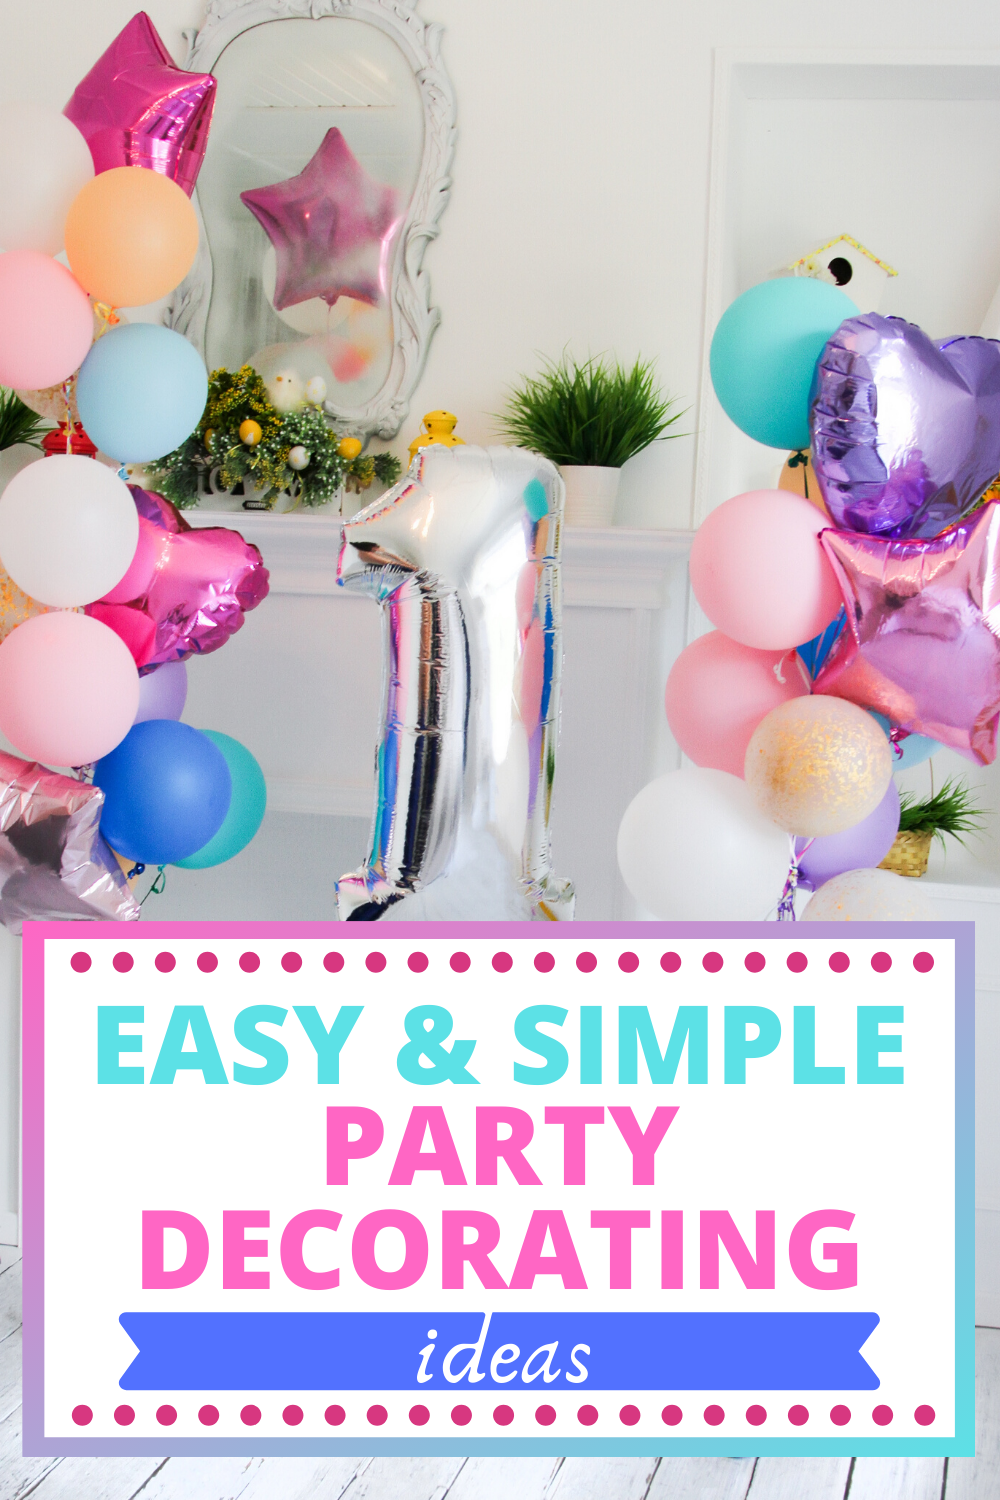 Easy and Simple Party Decorating ideas